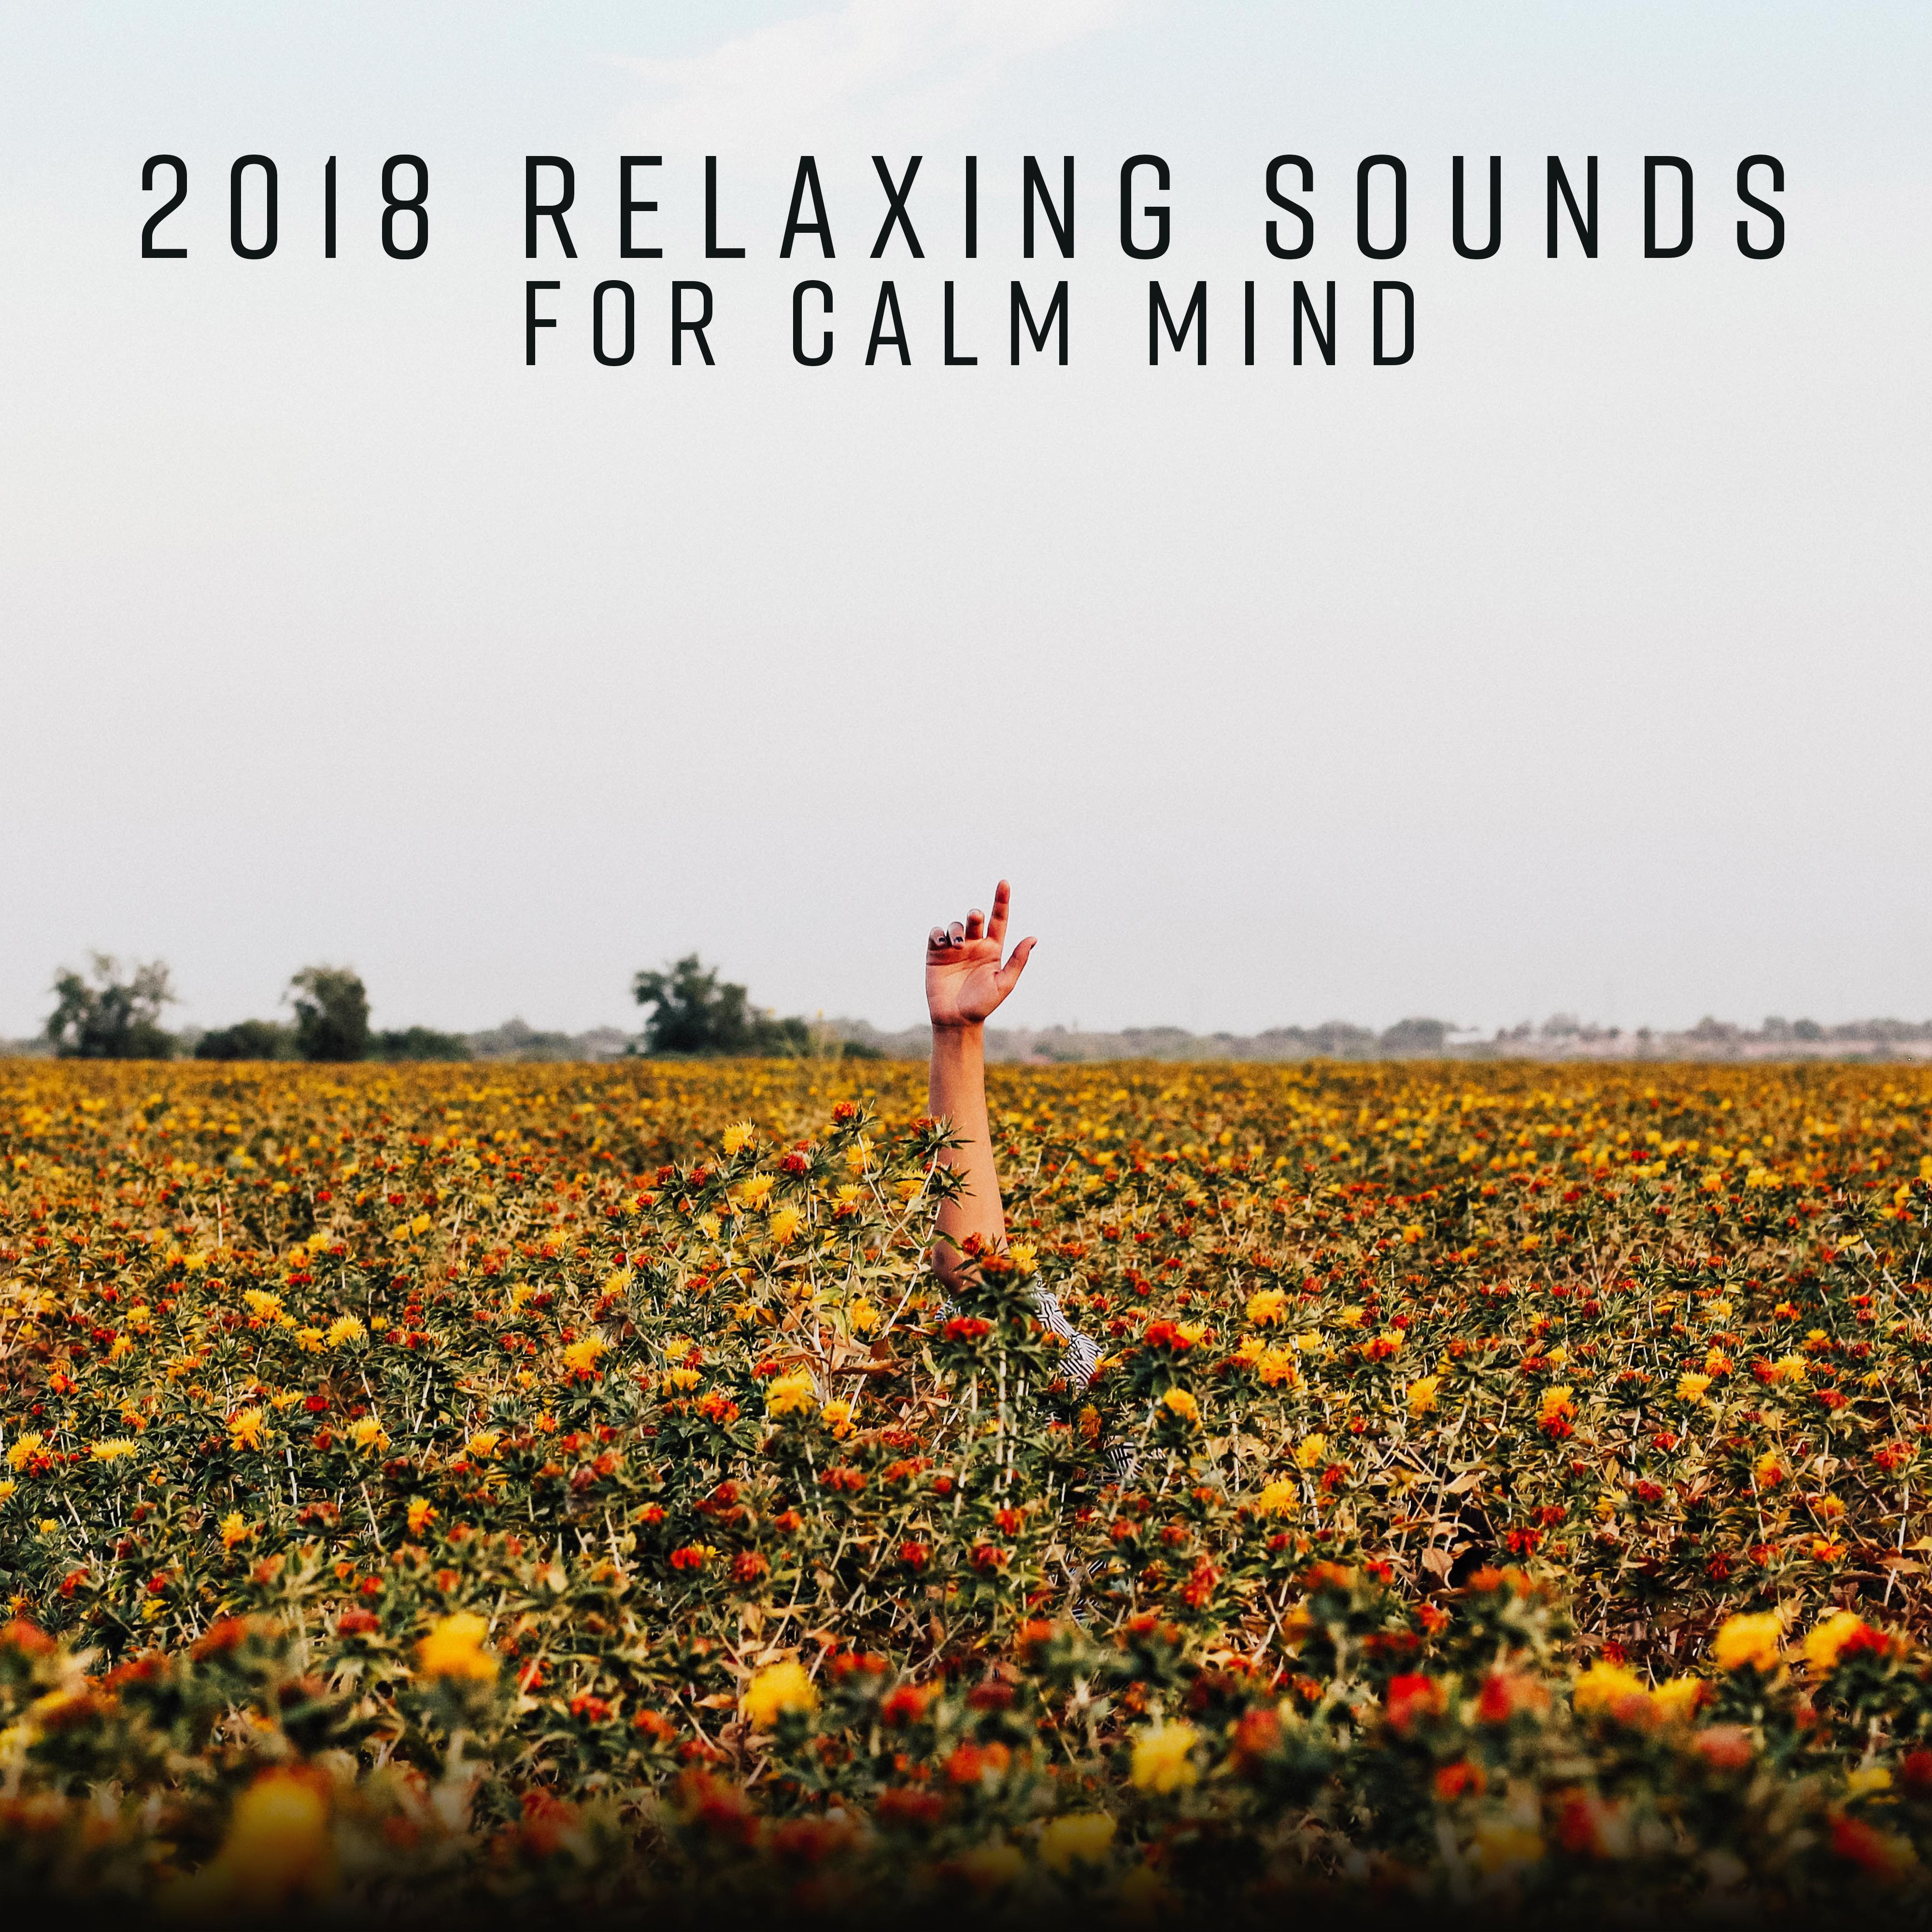 2018 Relaxing Sounds for Calm Mind